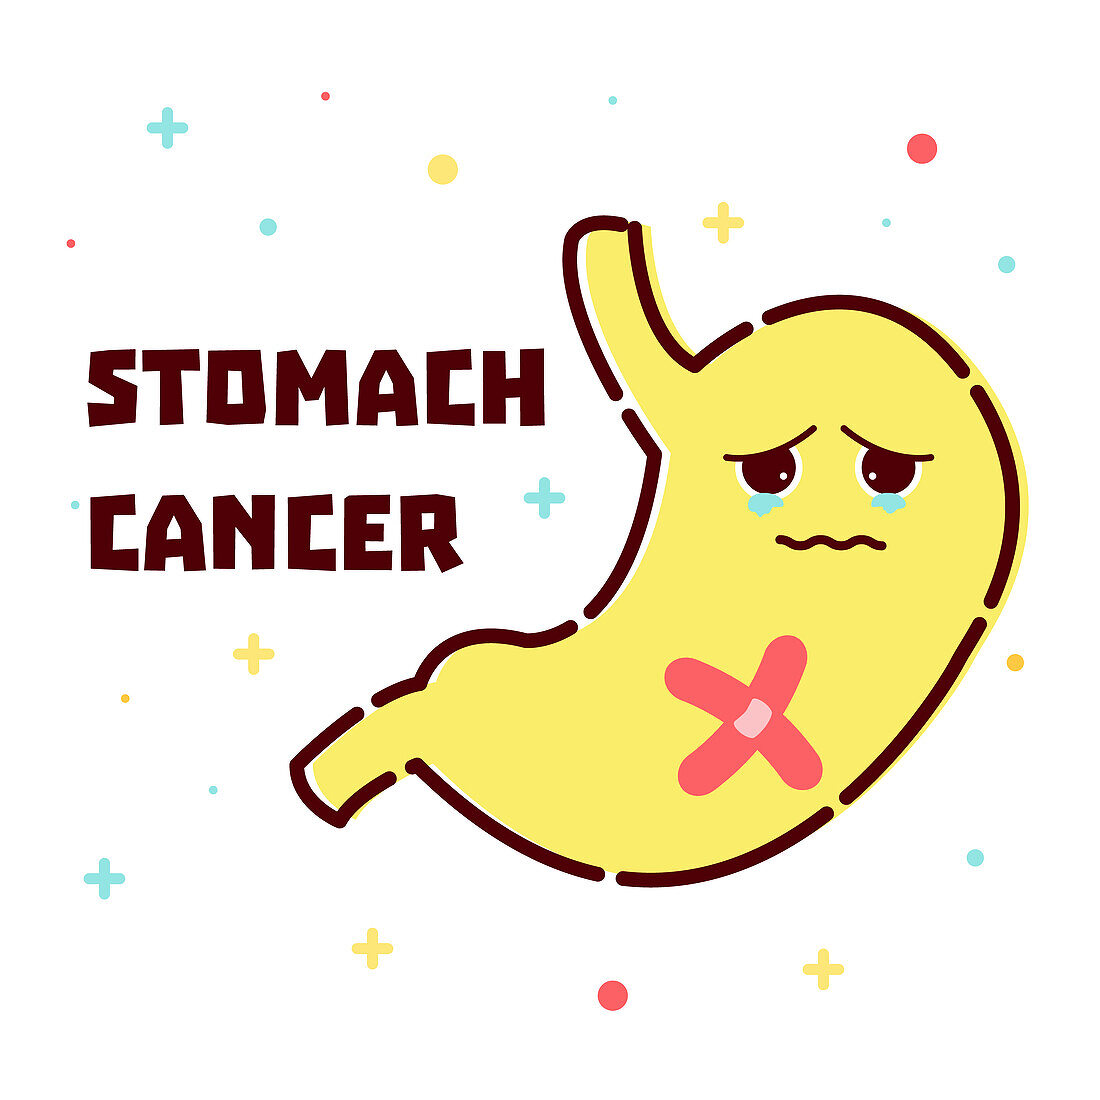 Stomach cancer, conceptual illustration